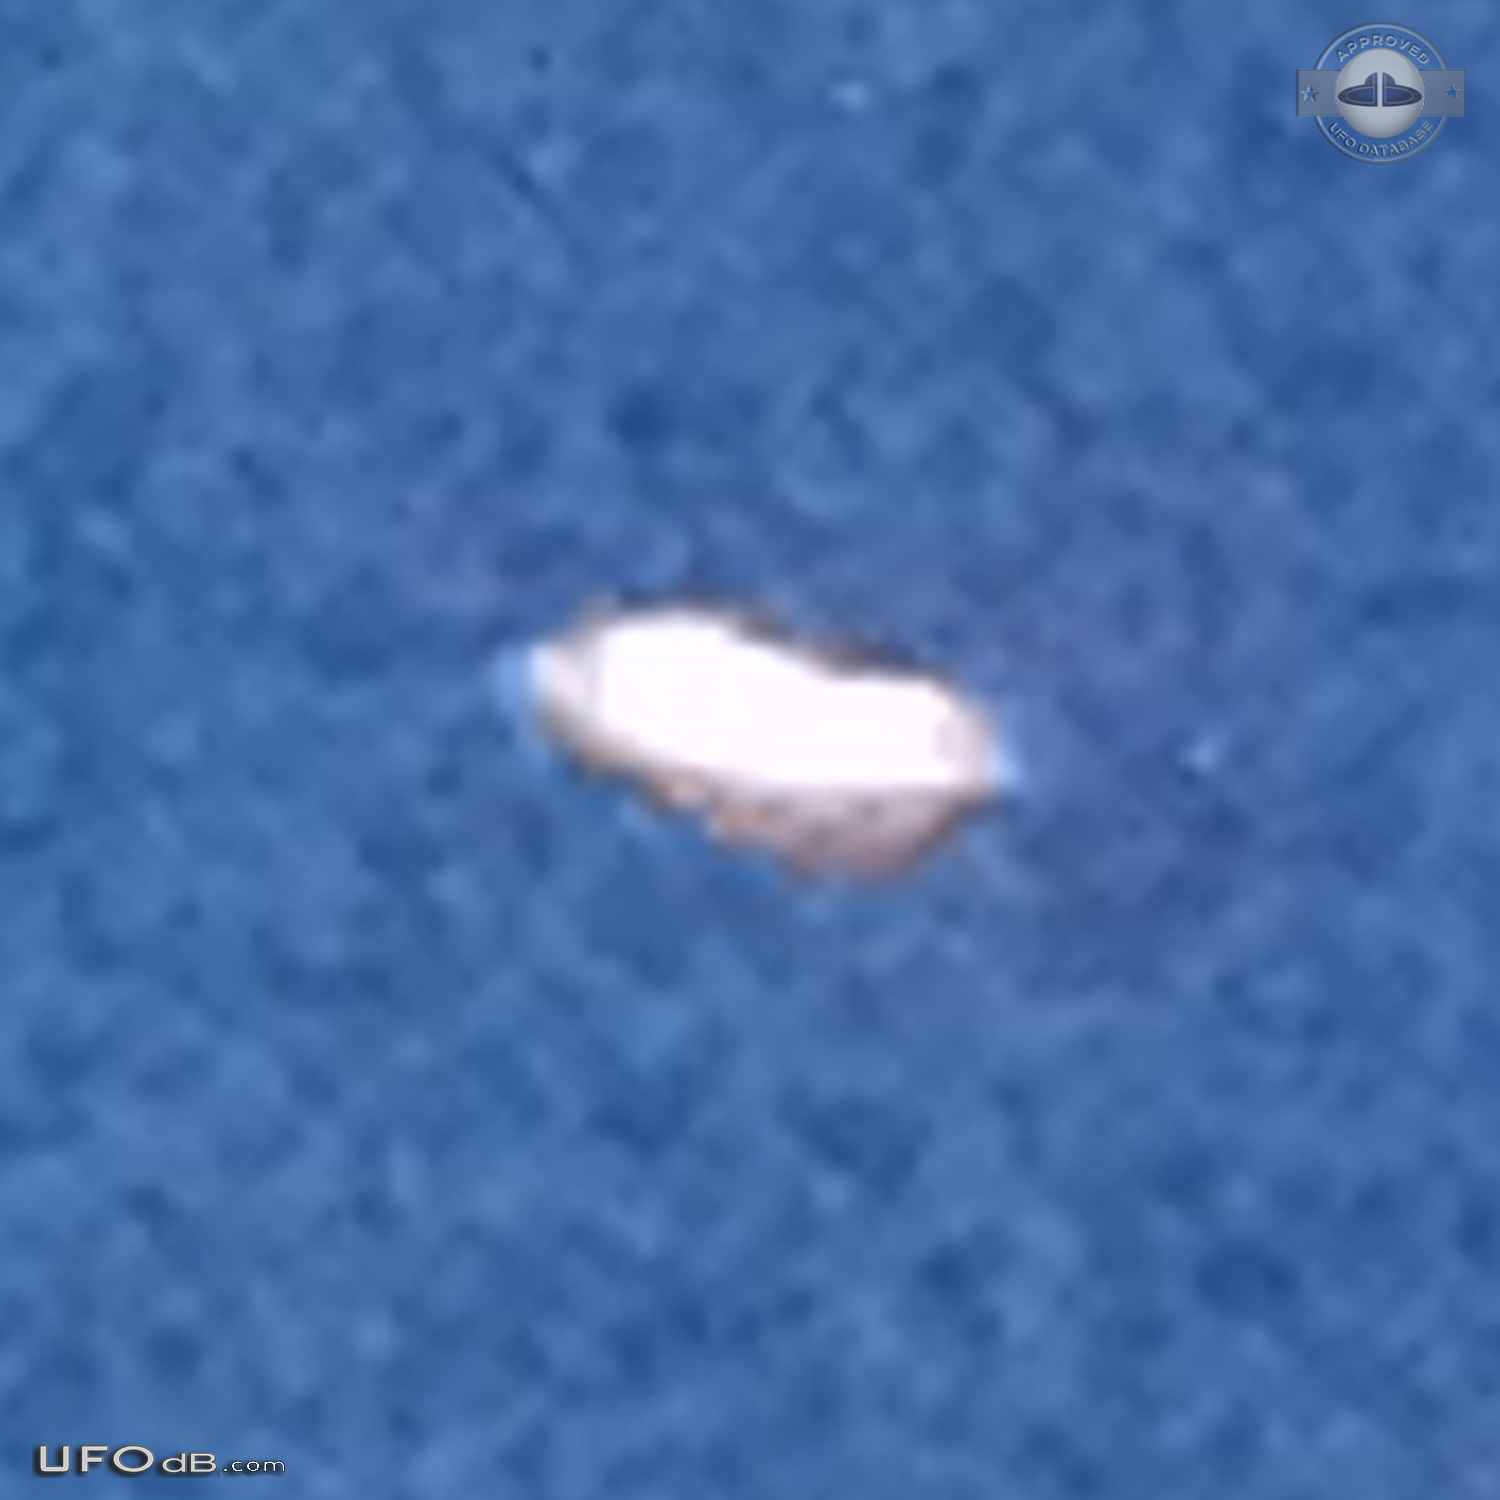 Luminescent dome shaped UFO with red light at its base Los Angeles USA UFO Picture #730-6